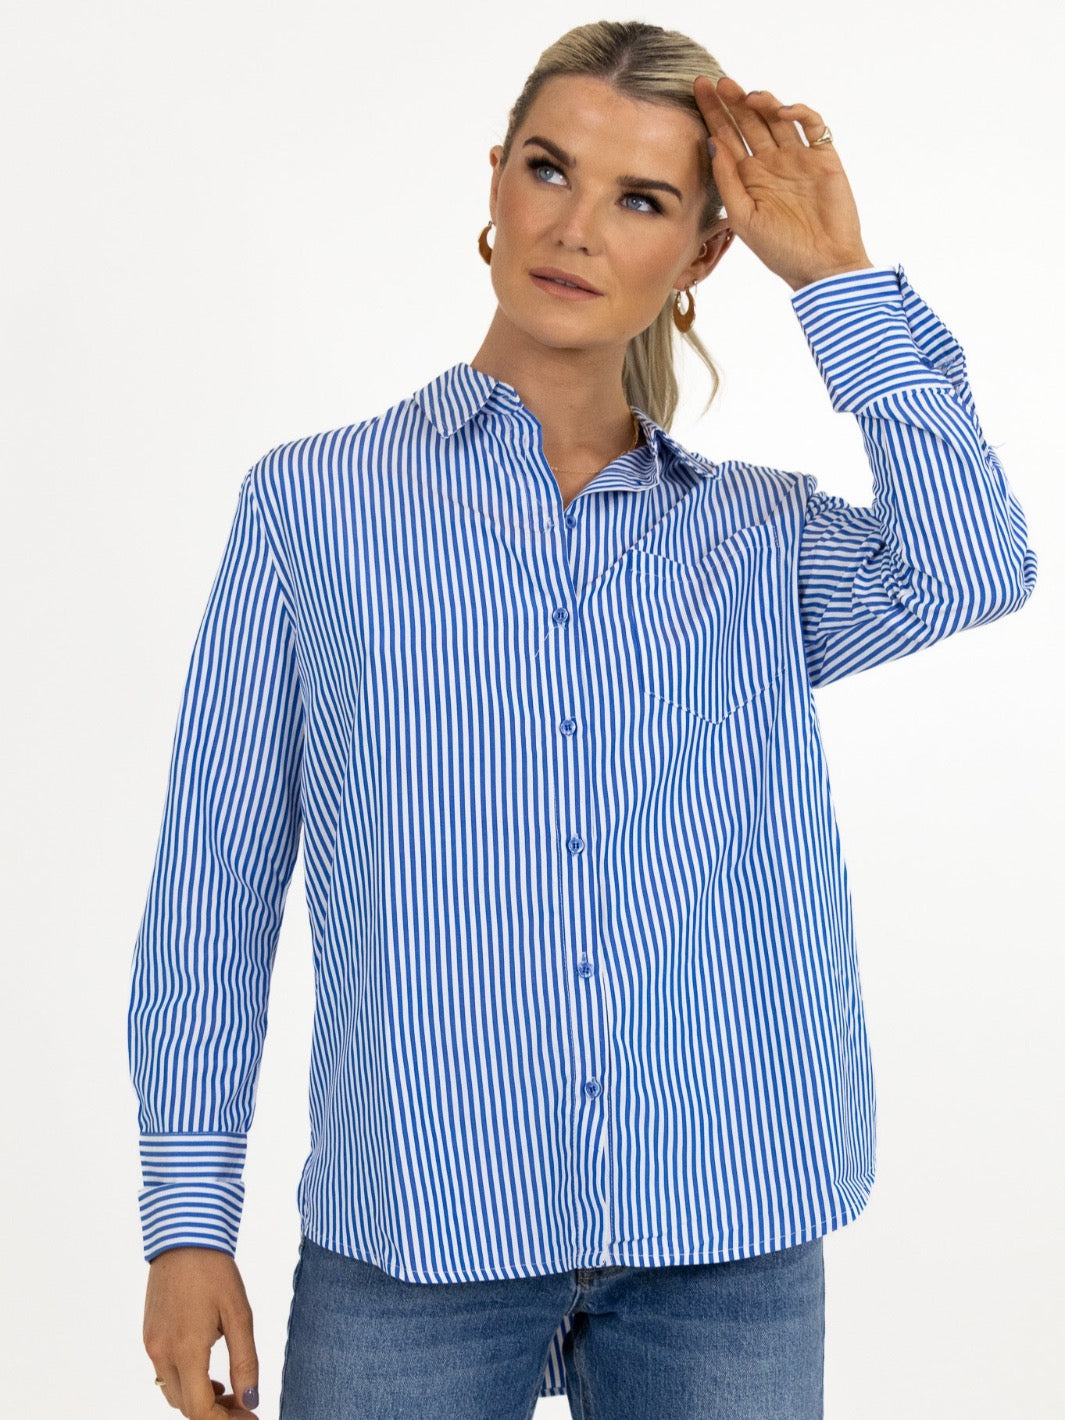 Kate & Pippa Oxford Striped Shirt In Navy Blue-Nicola Ross